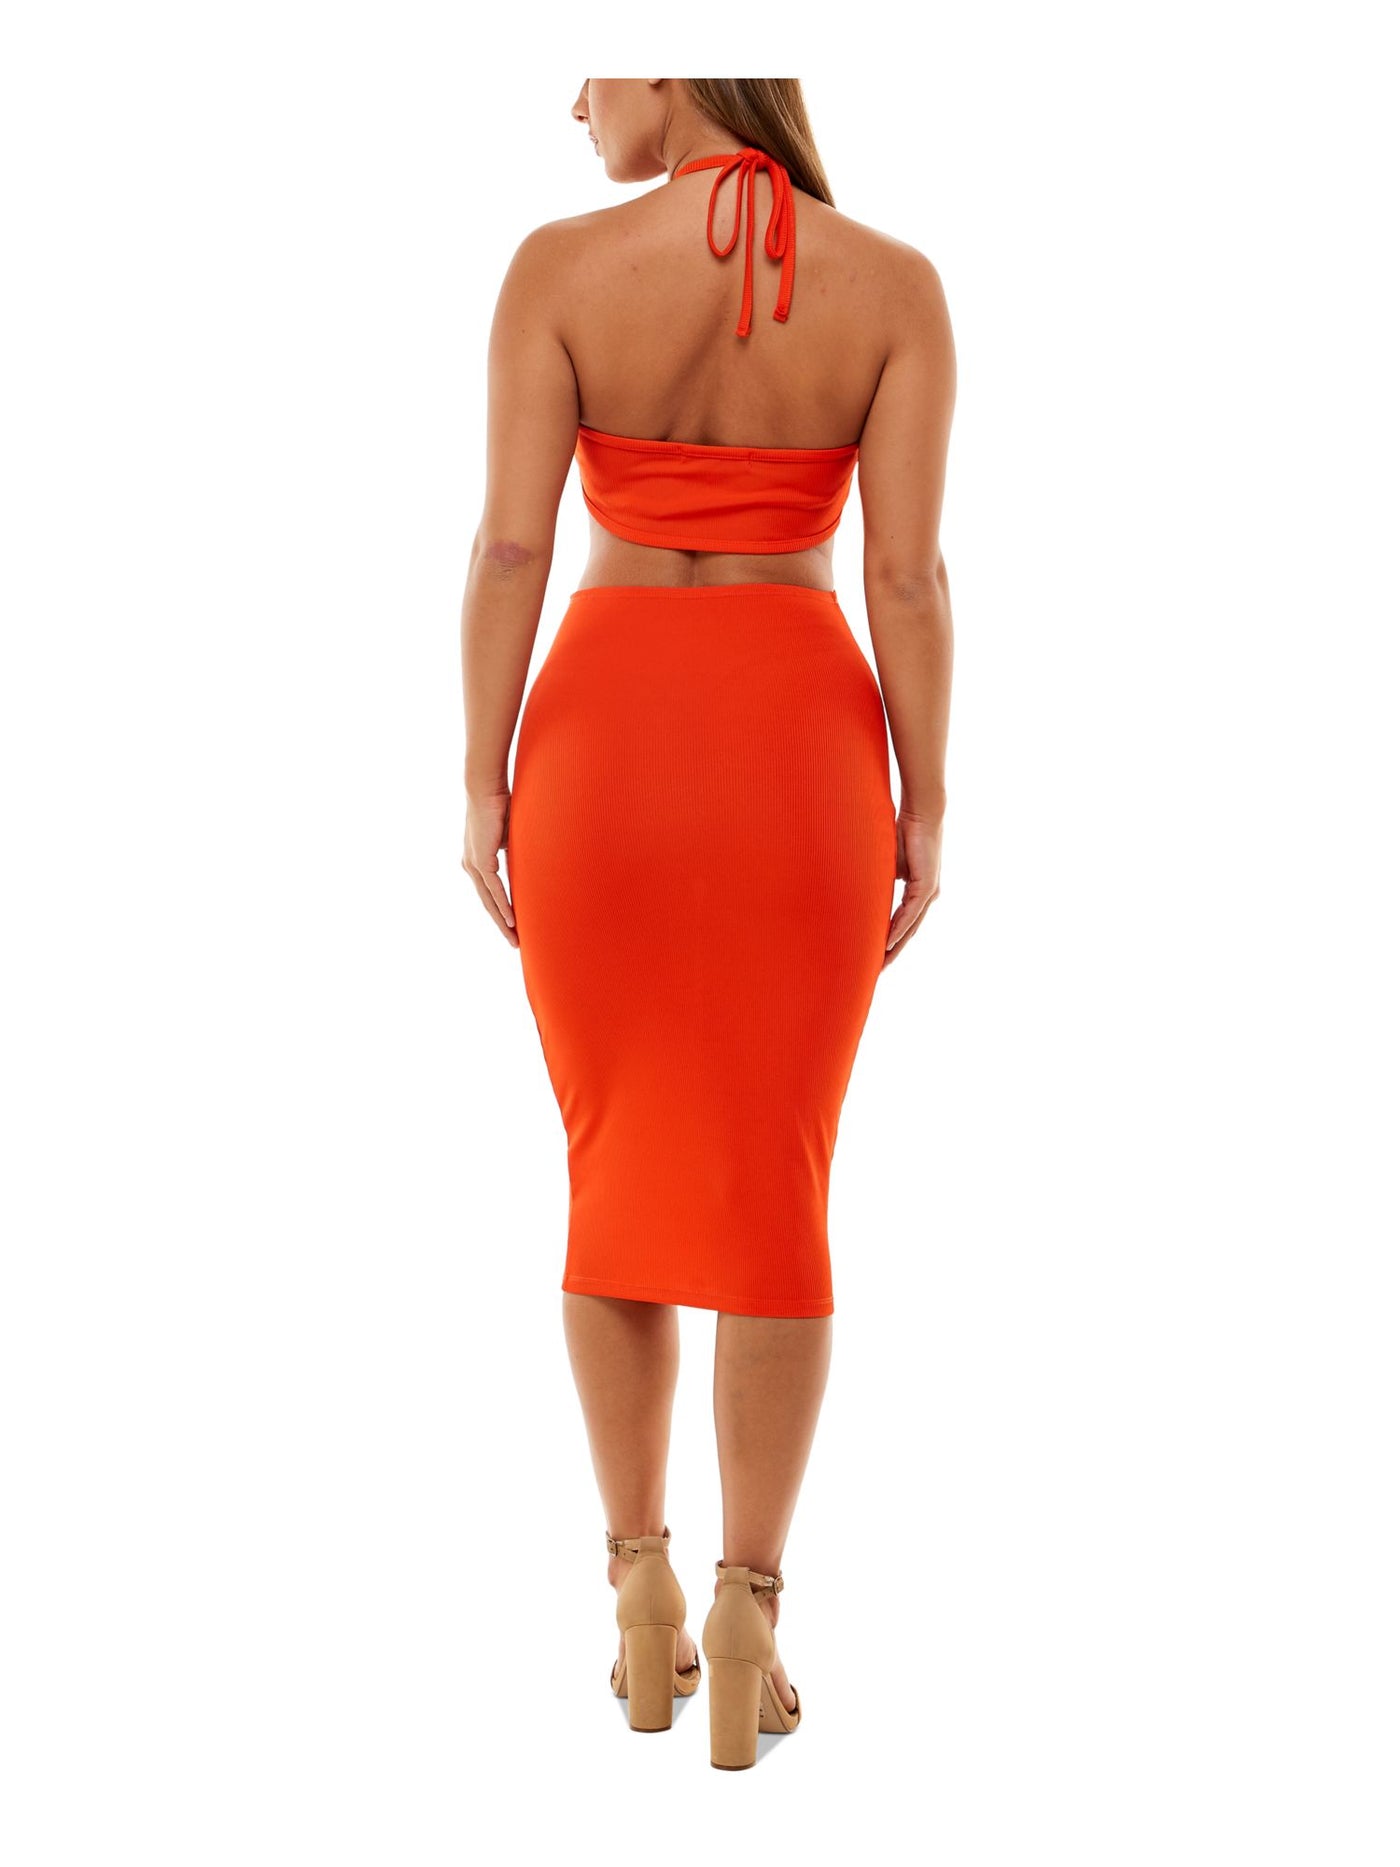 ALMOST FAMOUS Womens Orange Ribbed Cut Out Jersey Knit Tie Neck Sleeveless Halter Below The Knee Party Body Con Dress Juniors XL